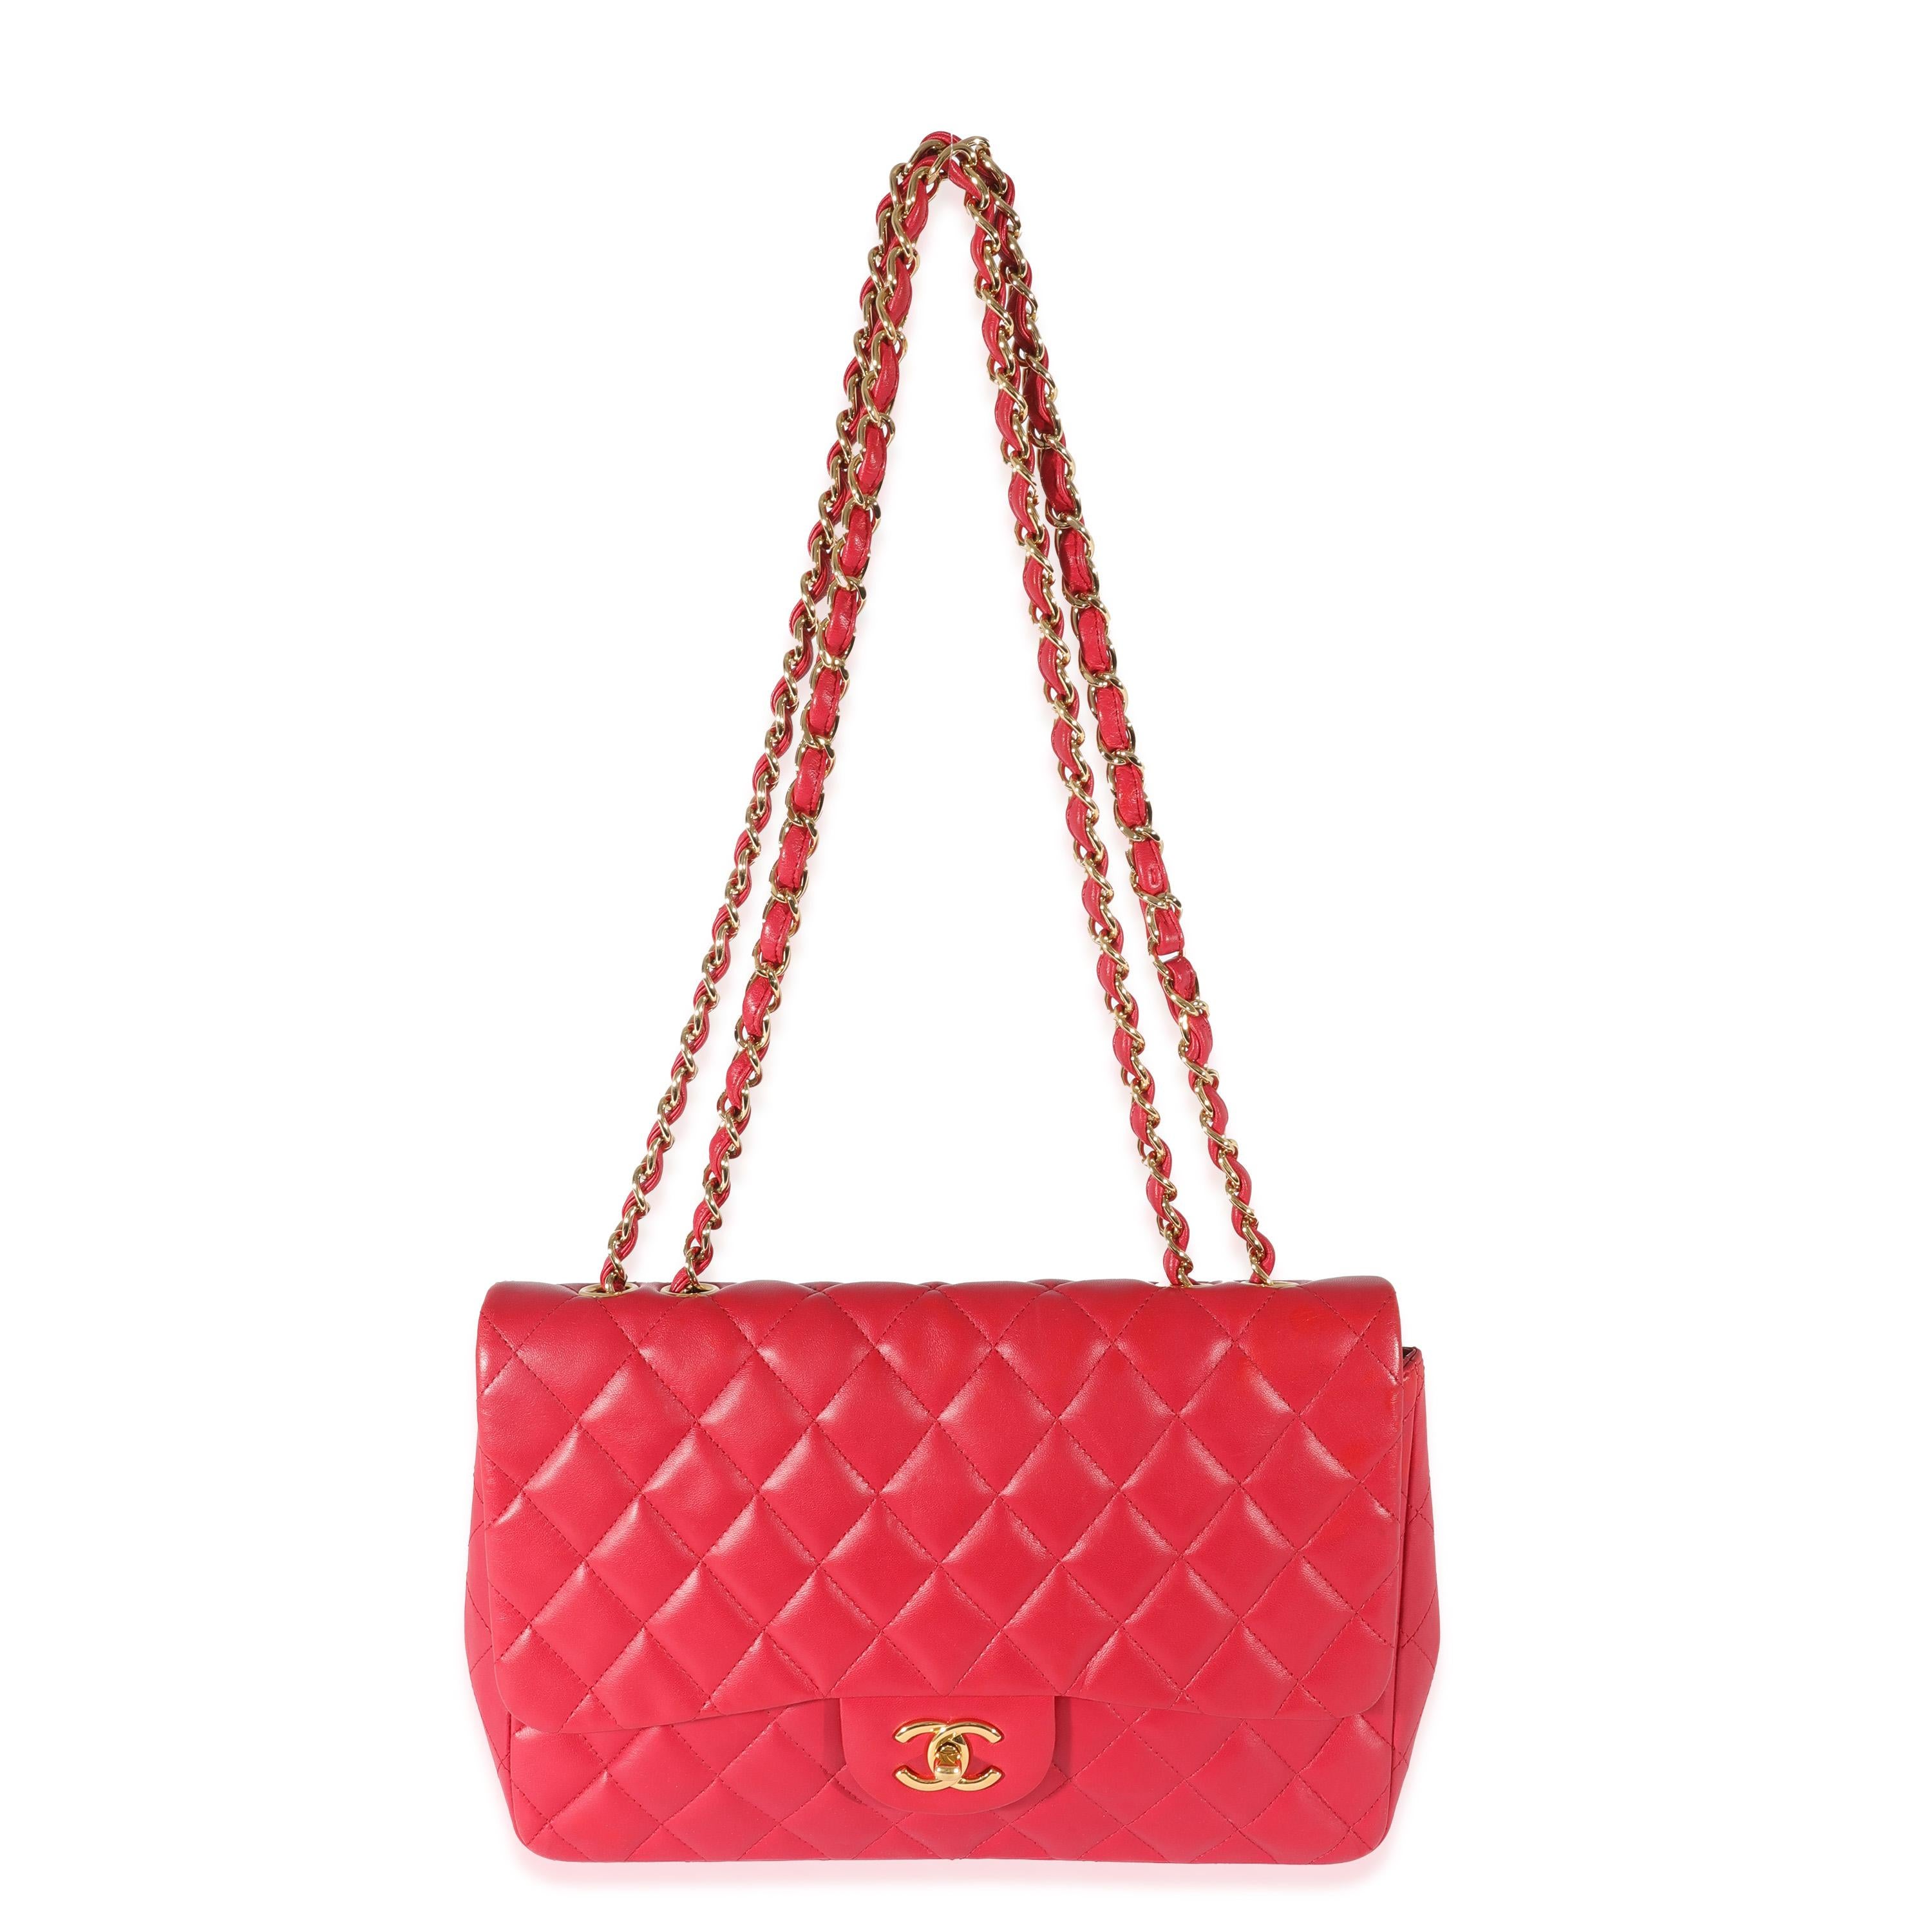 Listing Title: Chanel Dark Pink Lambskin Jumbo Single Flap Bag
SKU: 129431
MSRP: 9500.00
Condition: Pre-owned 
Condition Description: A timeless classic that never goes out of style, the flap bag from Chanel dates back to 1955 and has seen a number